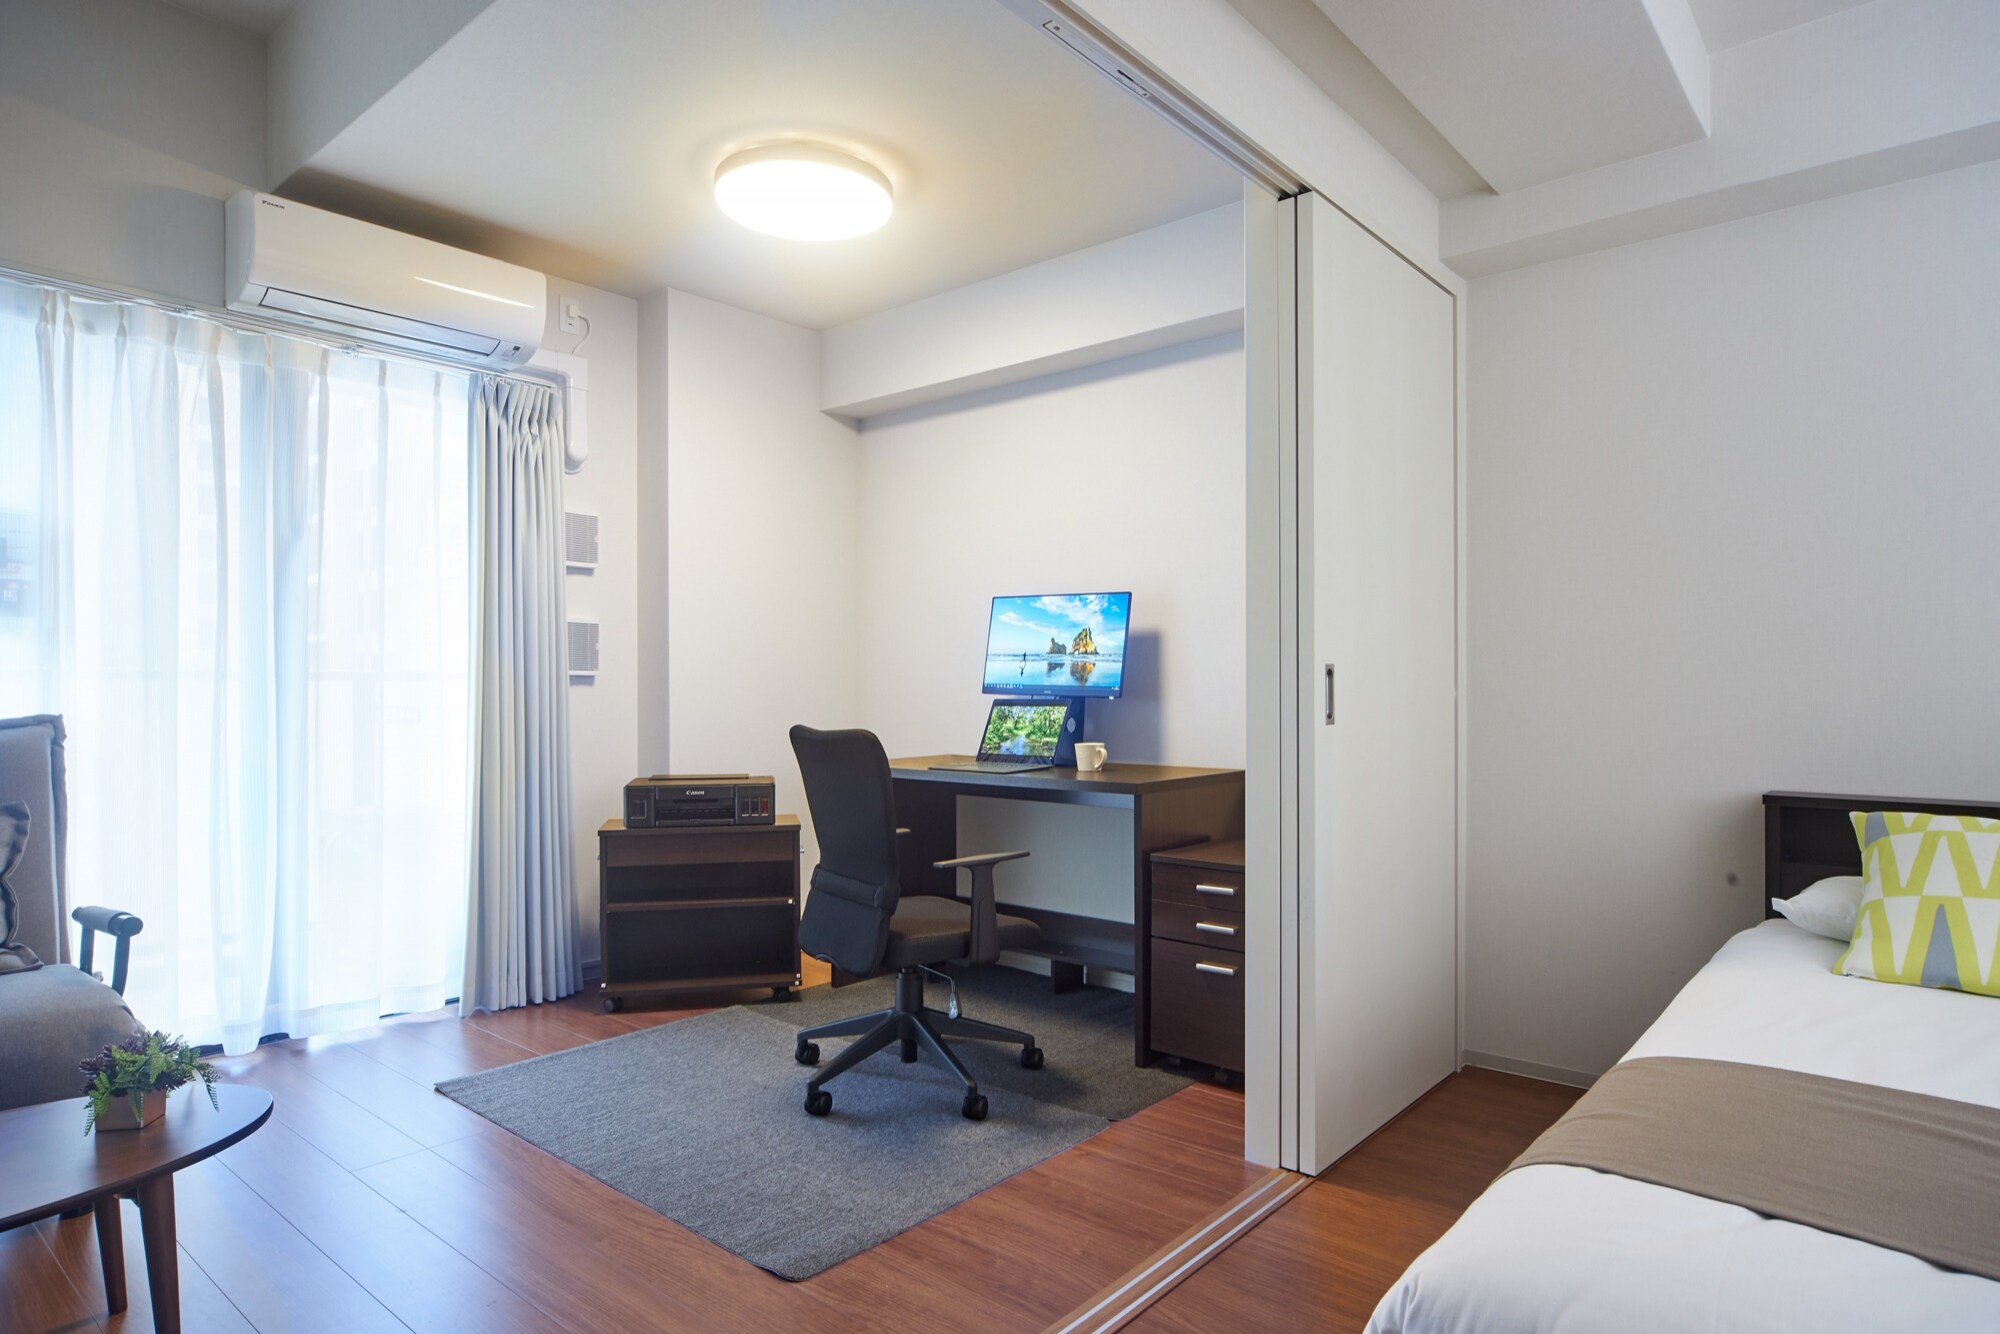 Property Image 1 - Comfortable home for business trips in Umeda